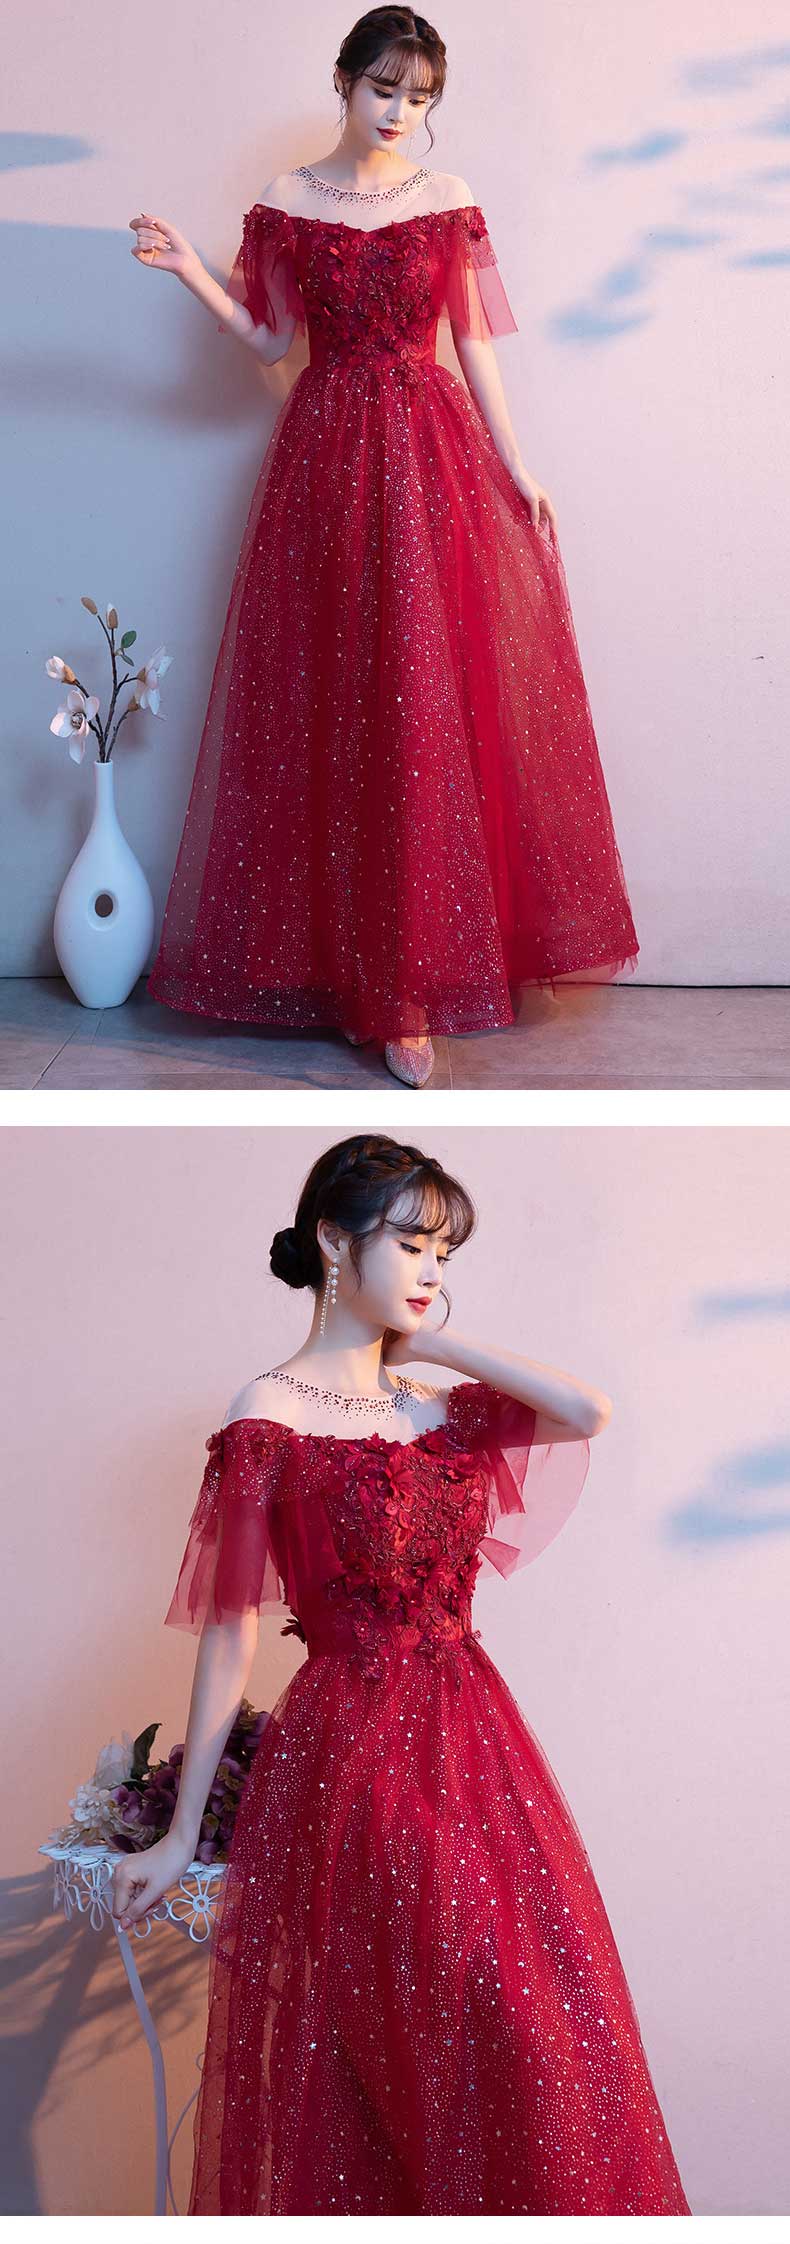 Sweet-Off-Shoulder-Chiffon-Wine-Red-Cocktail-Prom-Long-Dress13